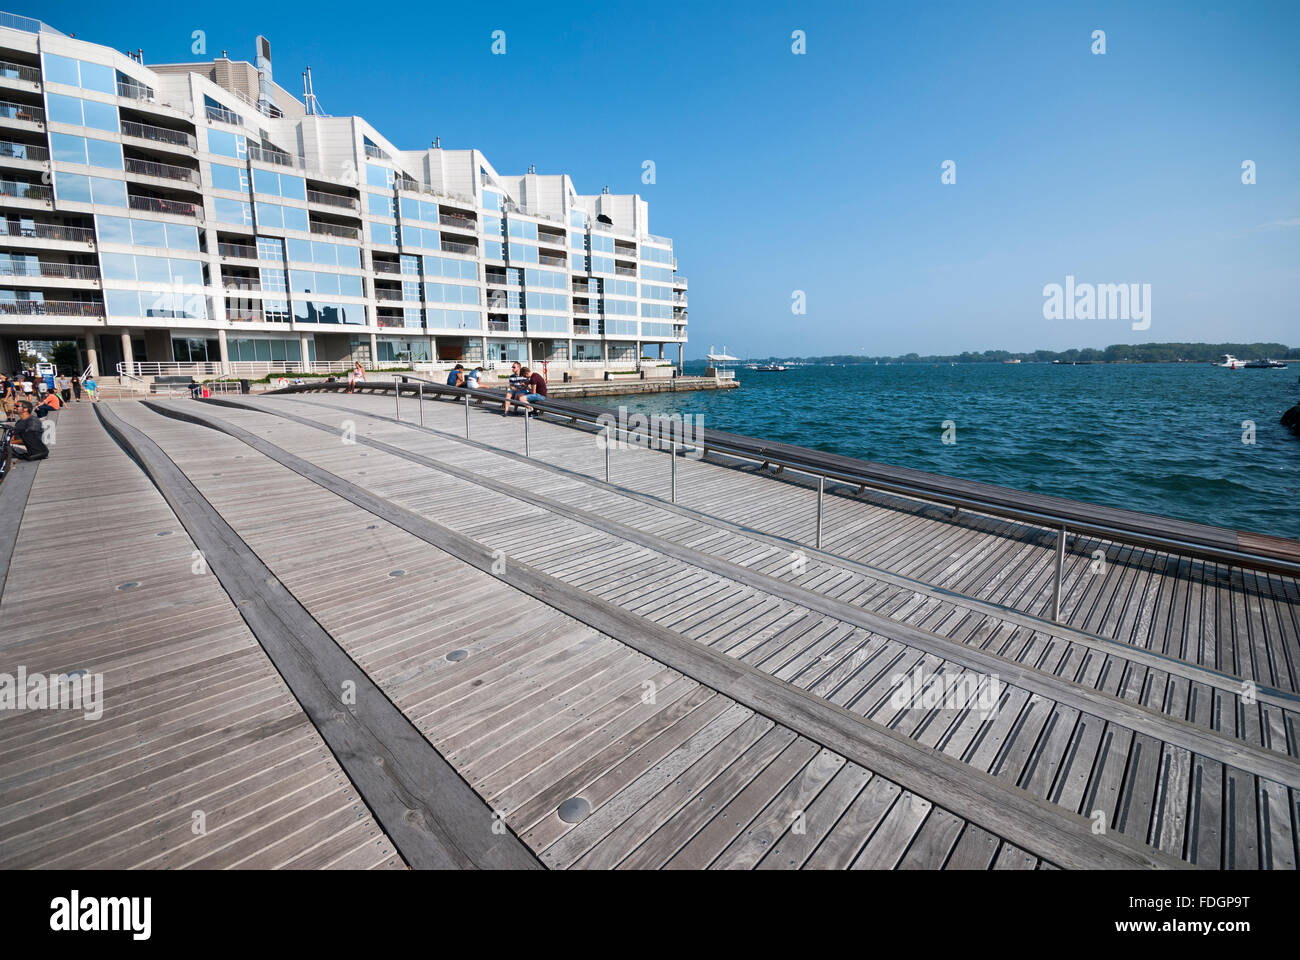 Toronto's undulating wave deck an experimental design installed at Harbourfront a tourist area in the city center. Stock Photo